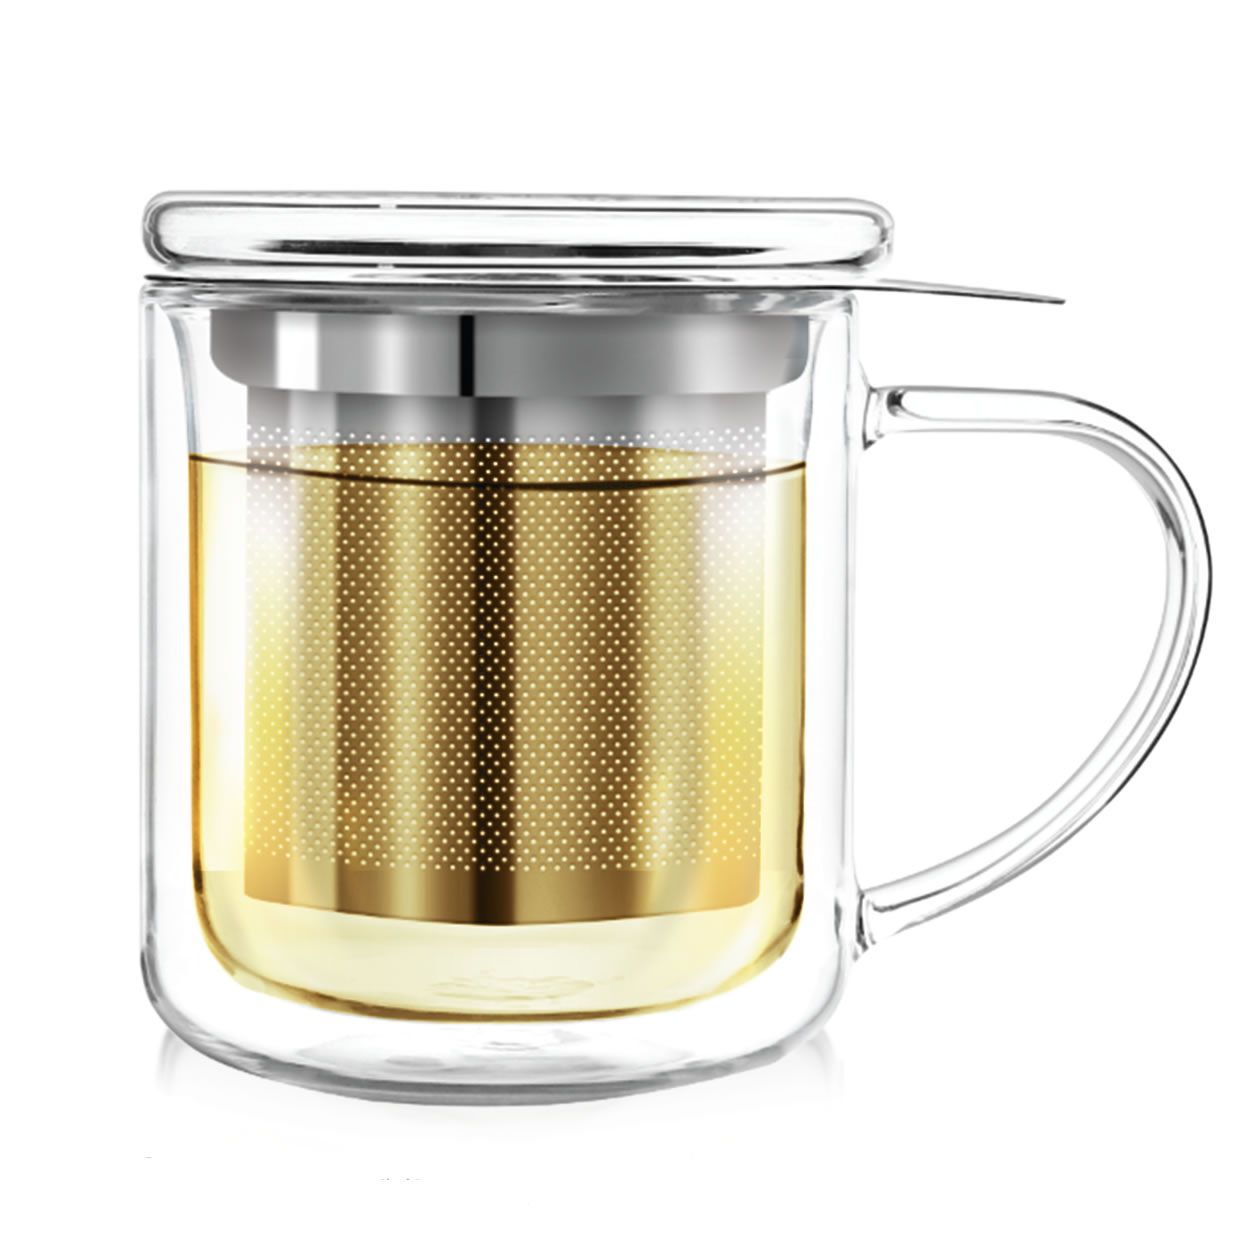 Teabloom Perfect Brew - Hot & Cold All-Brew Beverage Maker